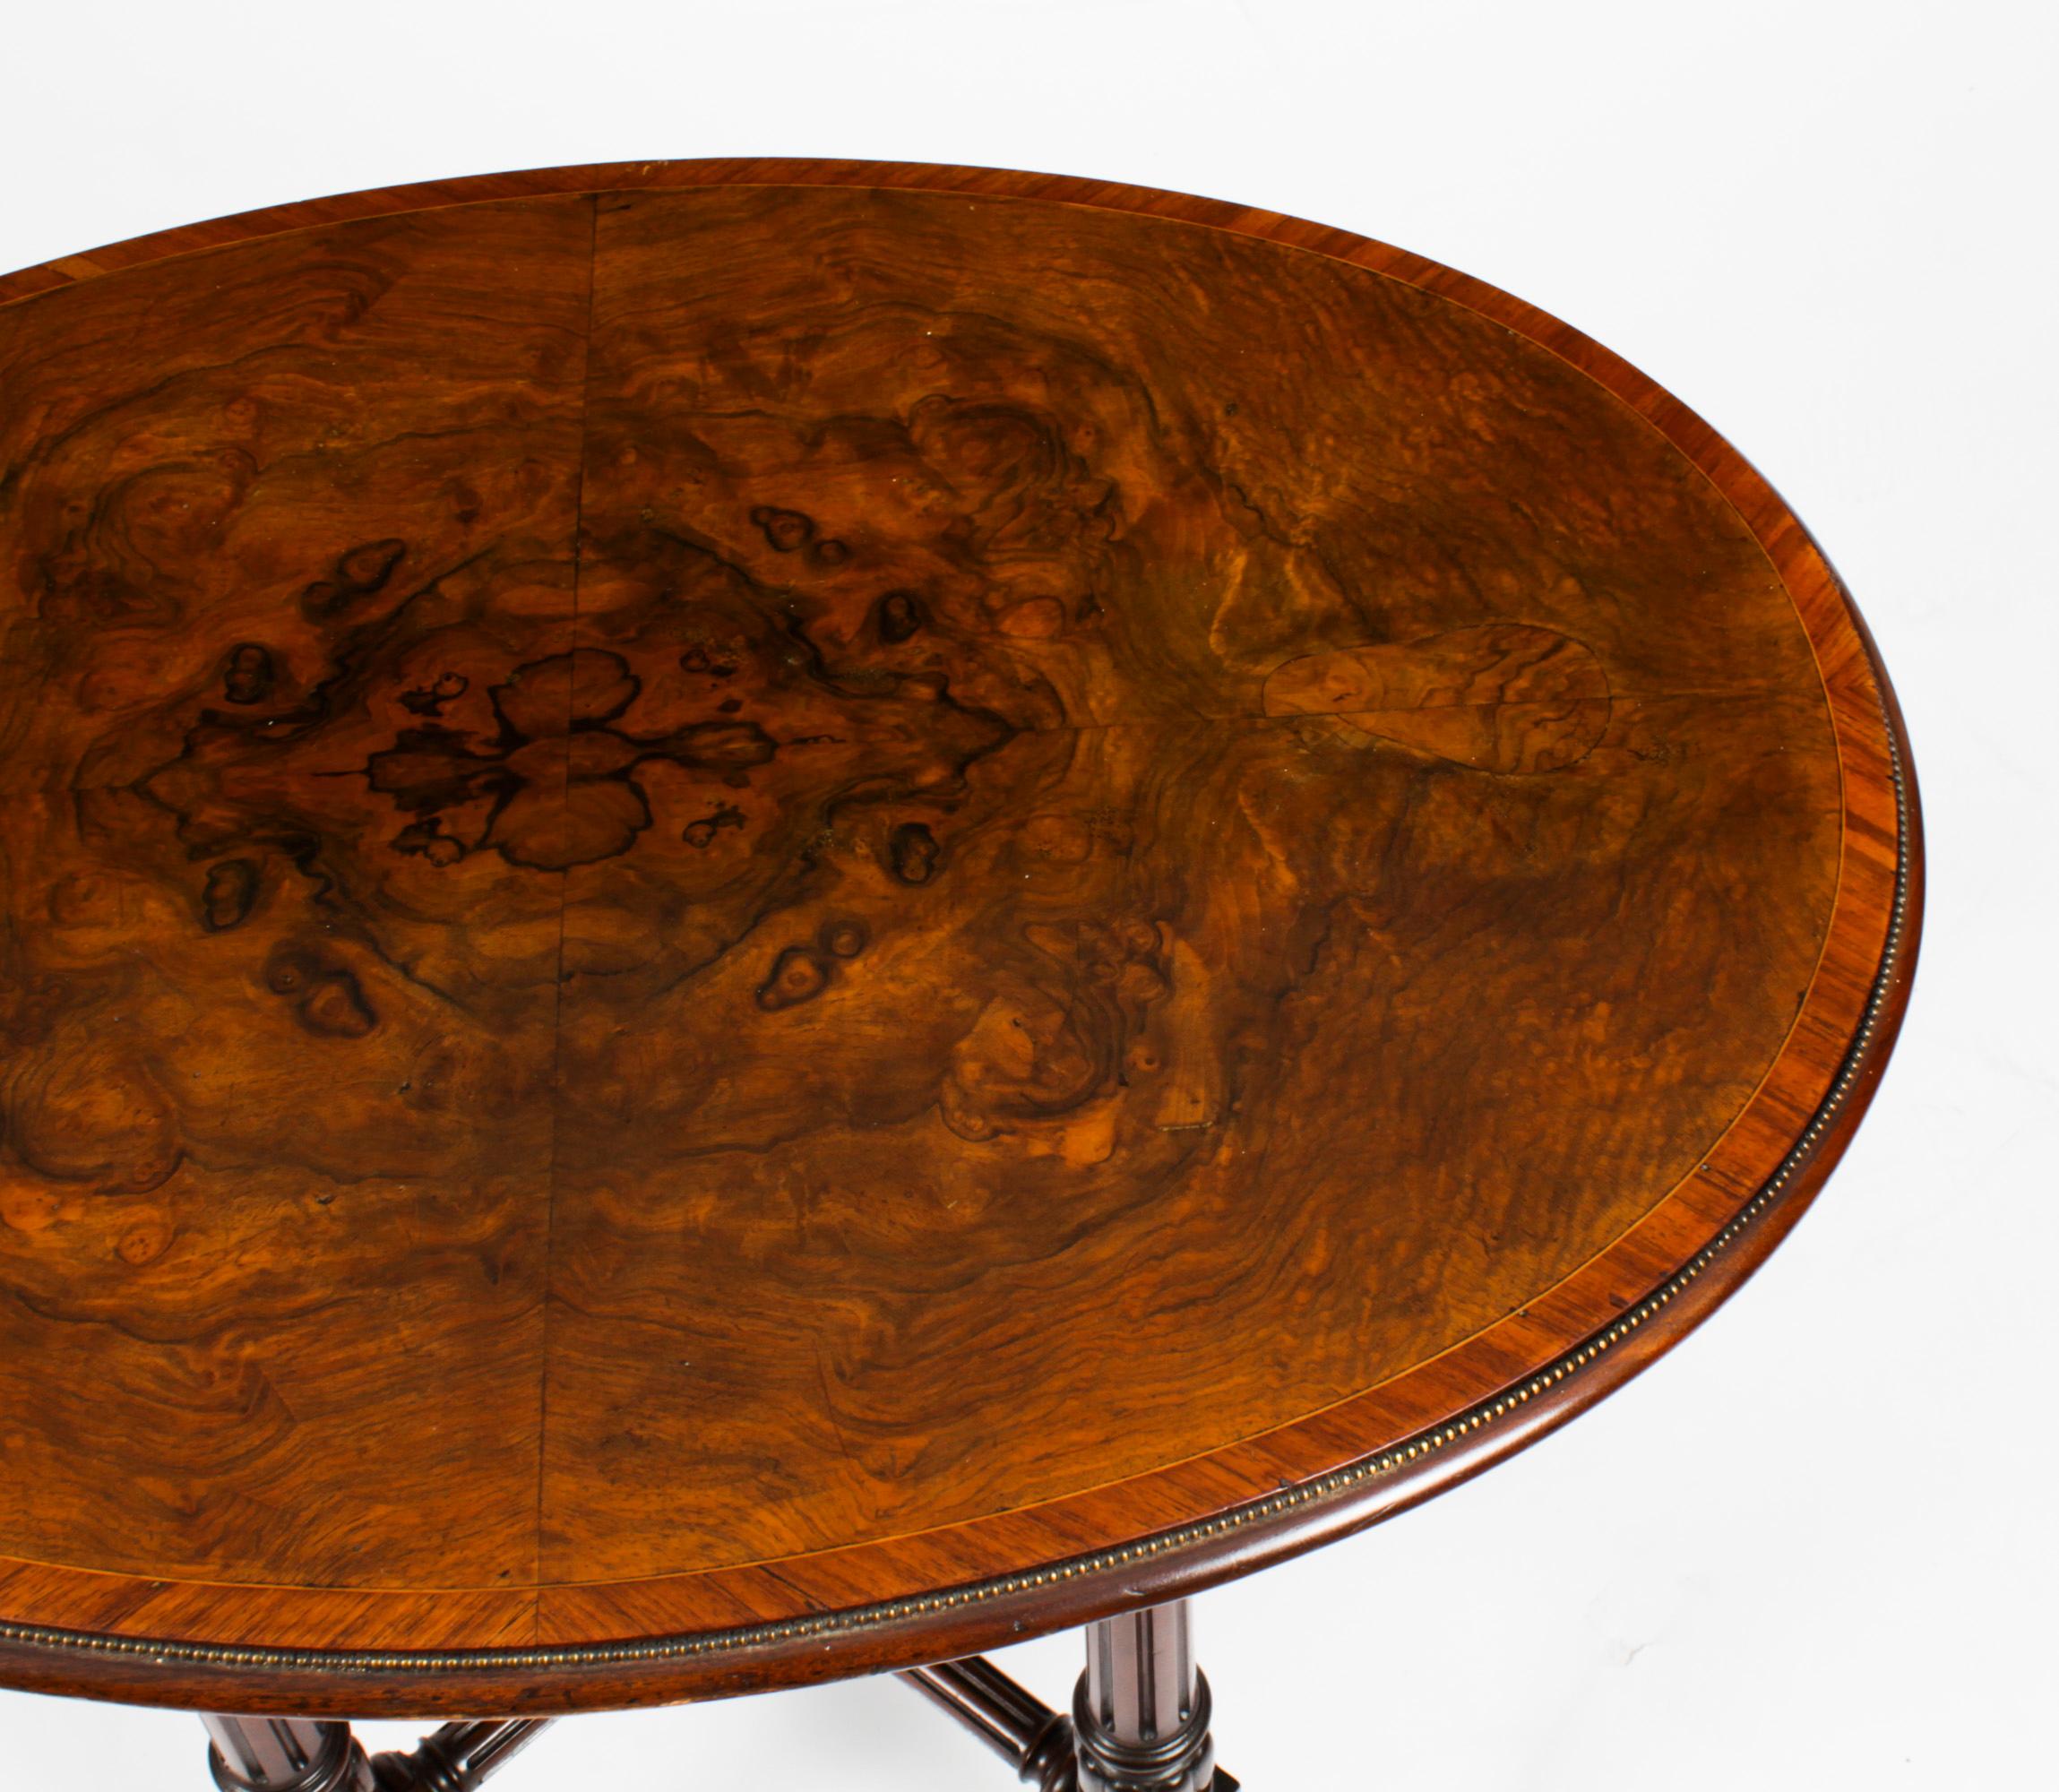 Late 19th Century Antique Victorian Burr Walnut & inlaid Occasional Table 19th Century